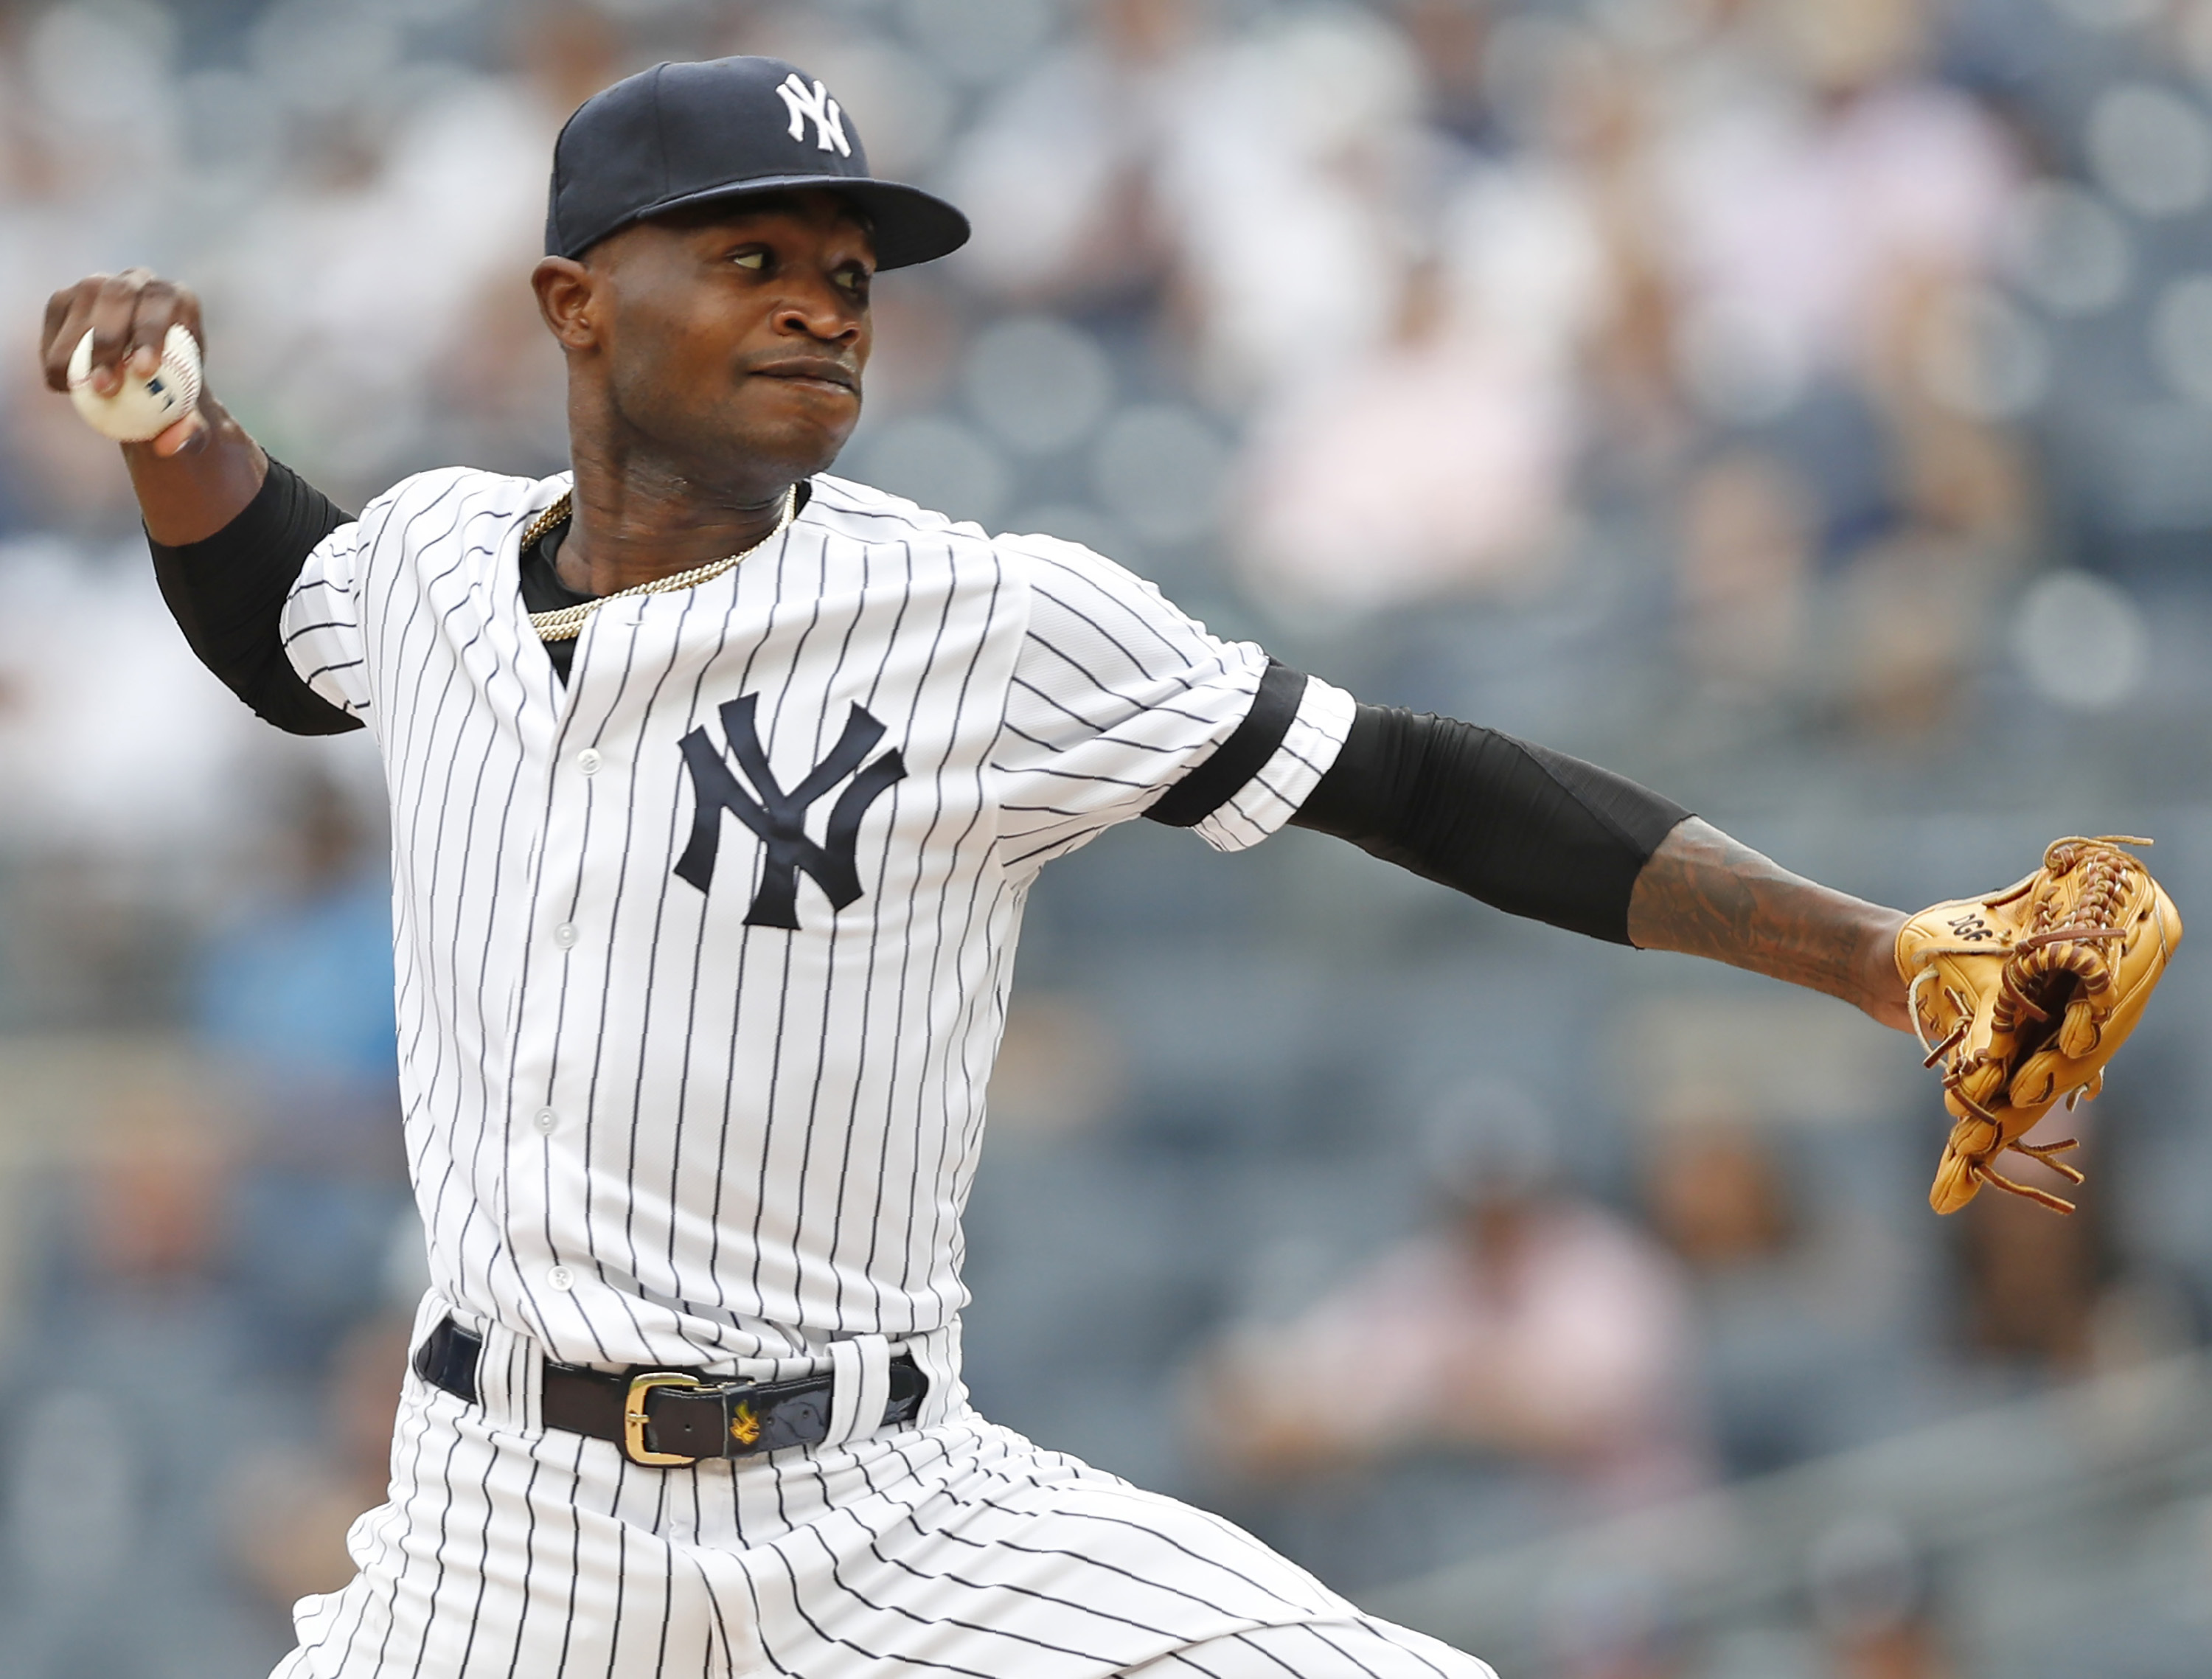 Yankees' German suspended 81 games for domestic violence